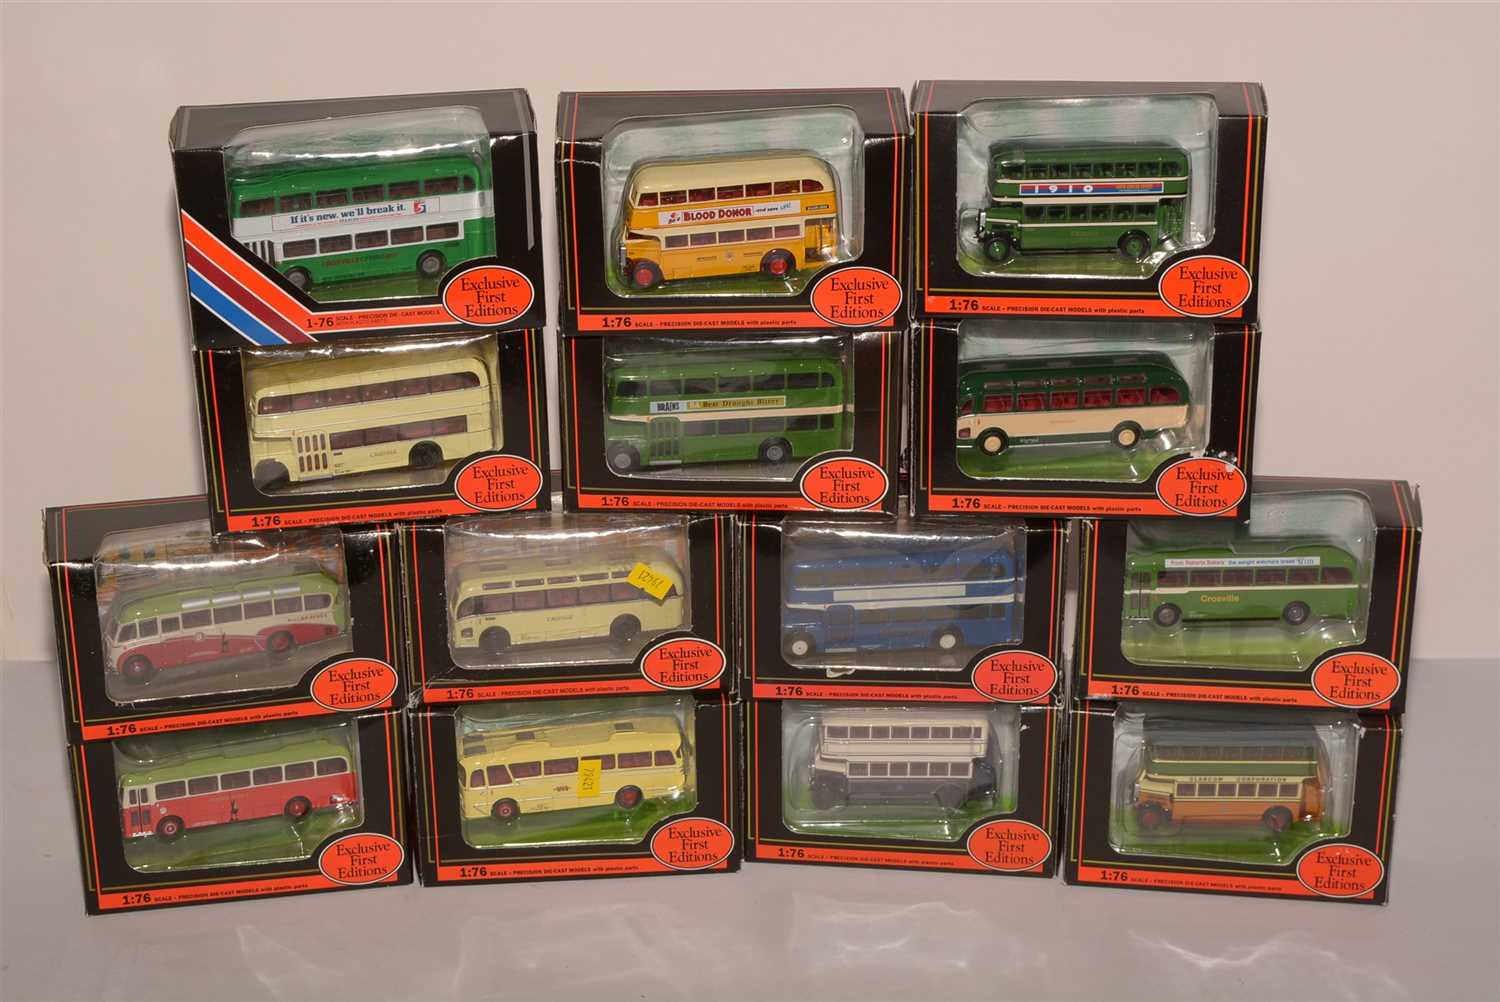 Lot 1349 - Die-cast model buses by Exclusive First Editions.